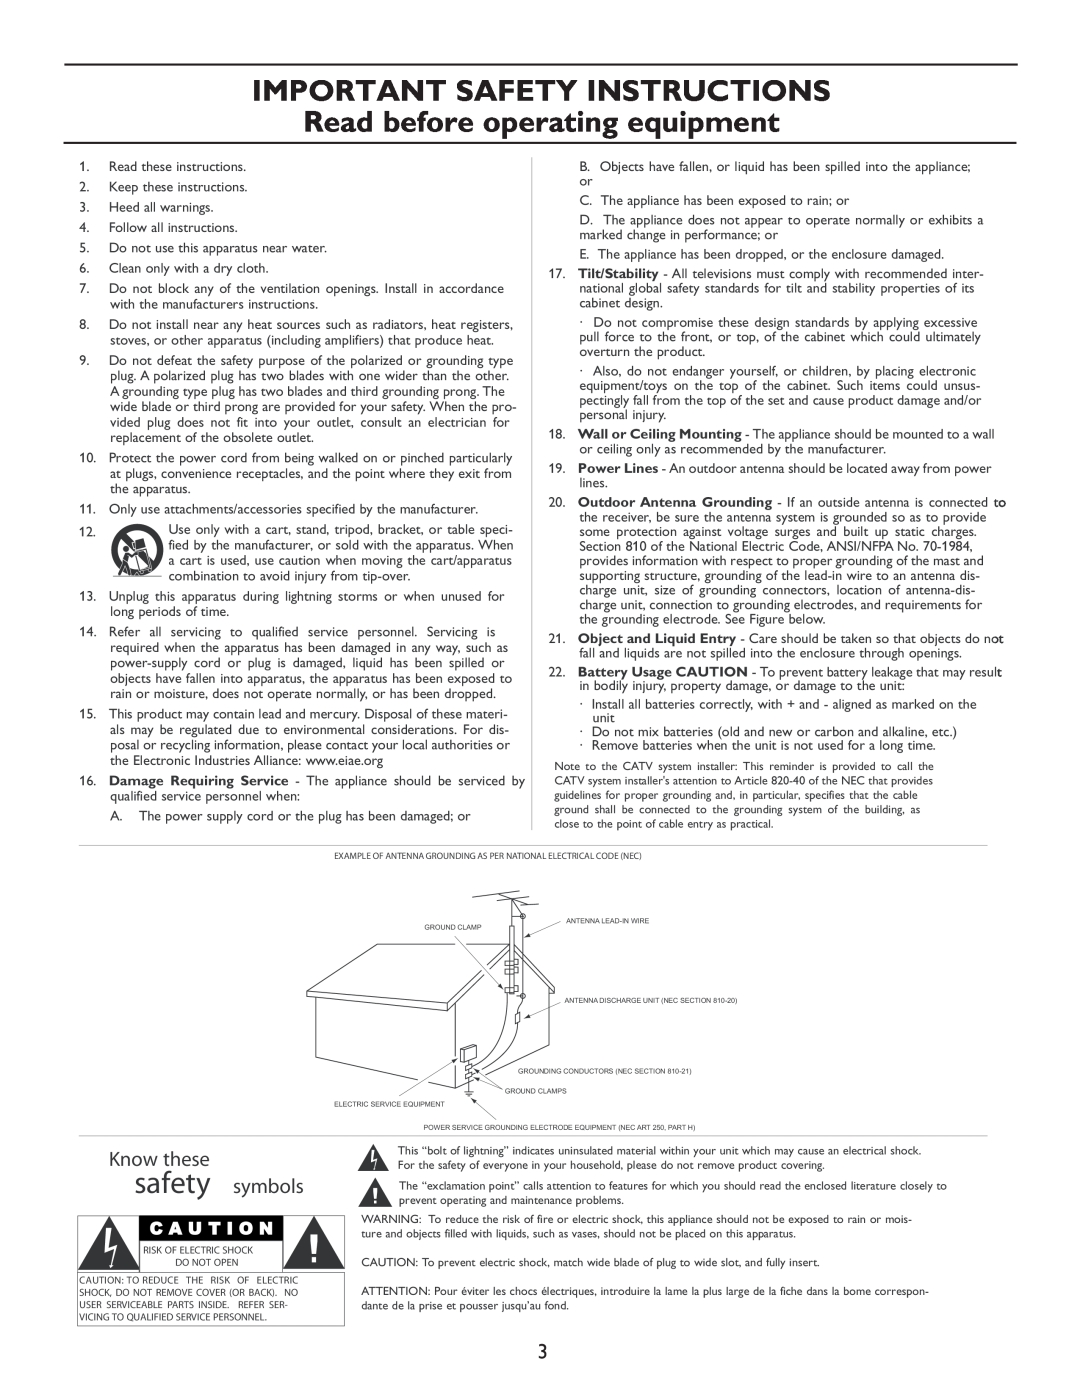 Philips 27HT7210D Know these safety symbols, IMPORTANT SAFETY INSTRUCTIONS Read before operating equipment, C A U T I O N 